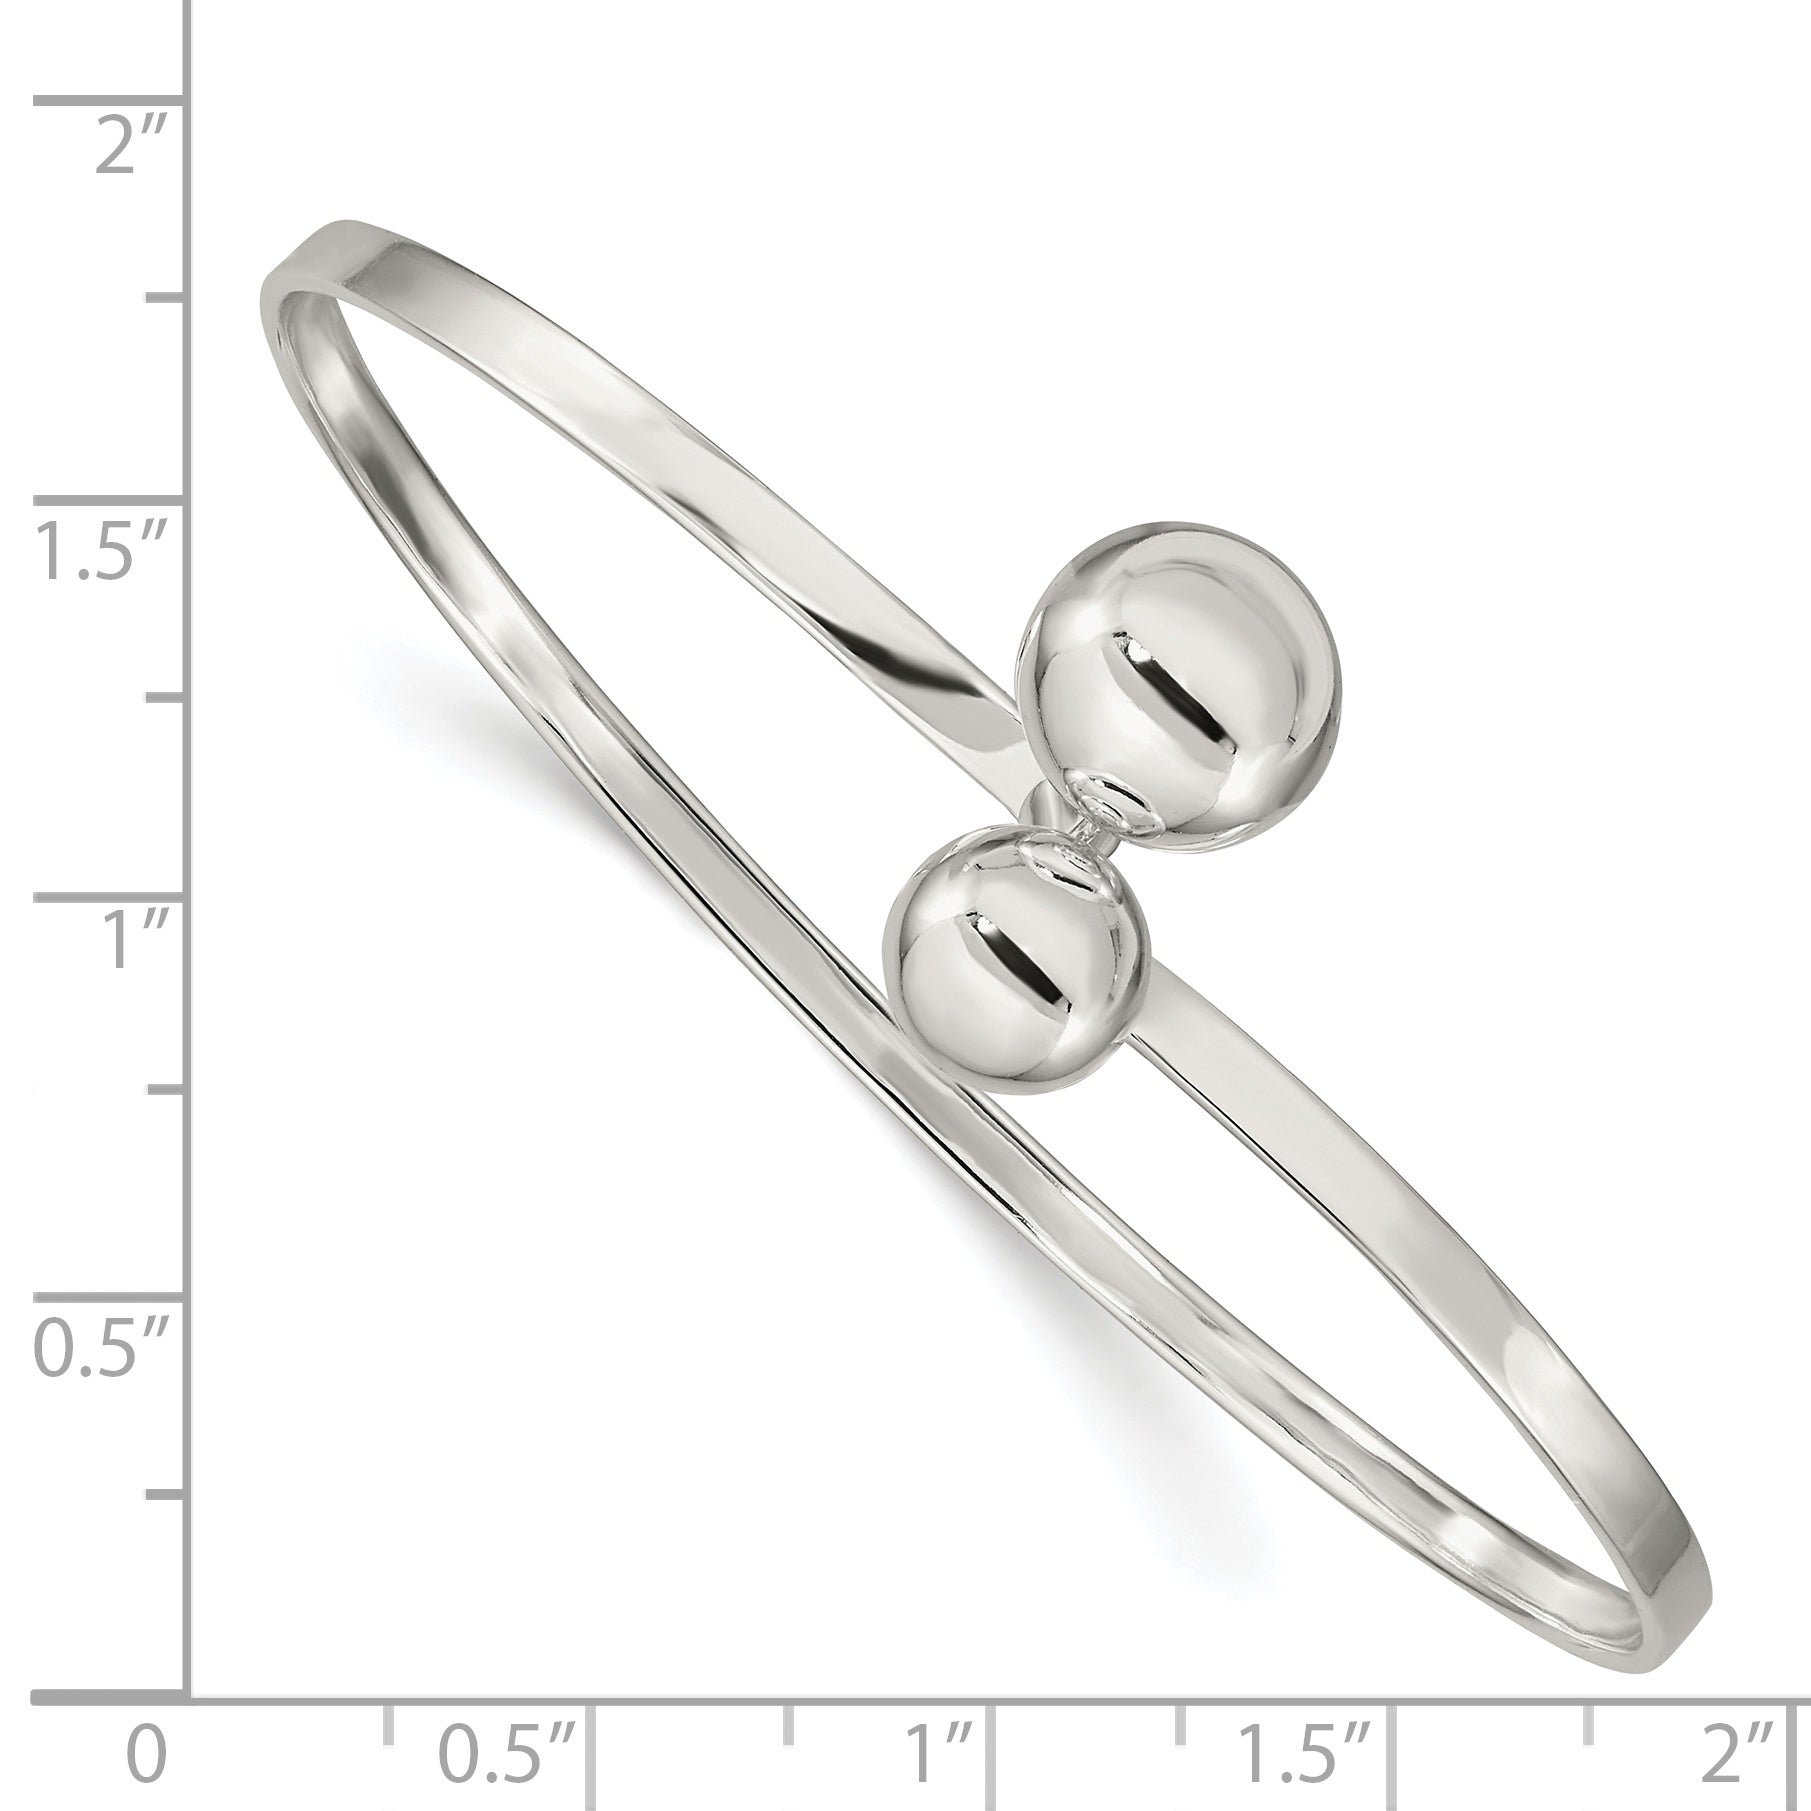 Sterling Silver Twisted Ball Catch Bangle